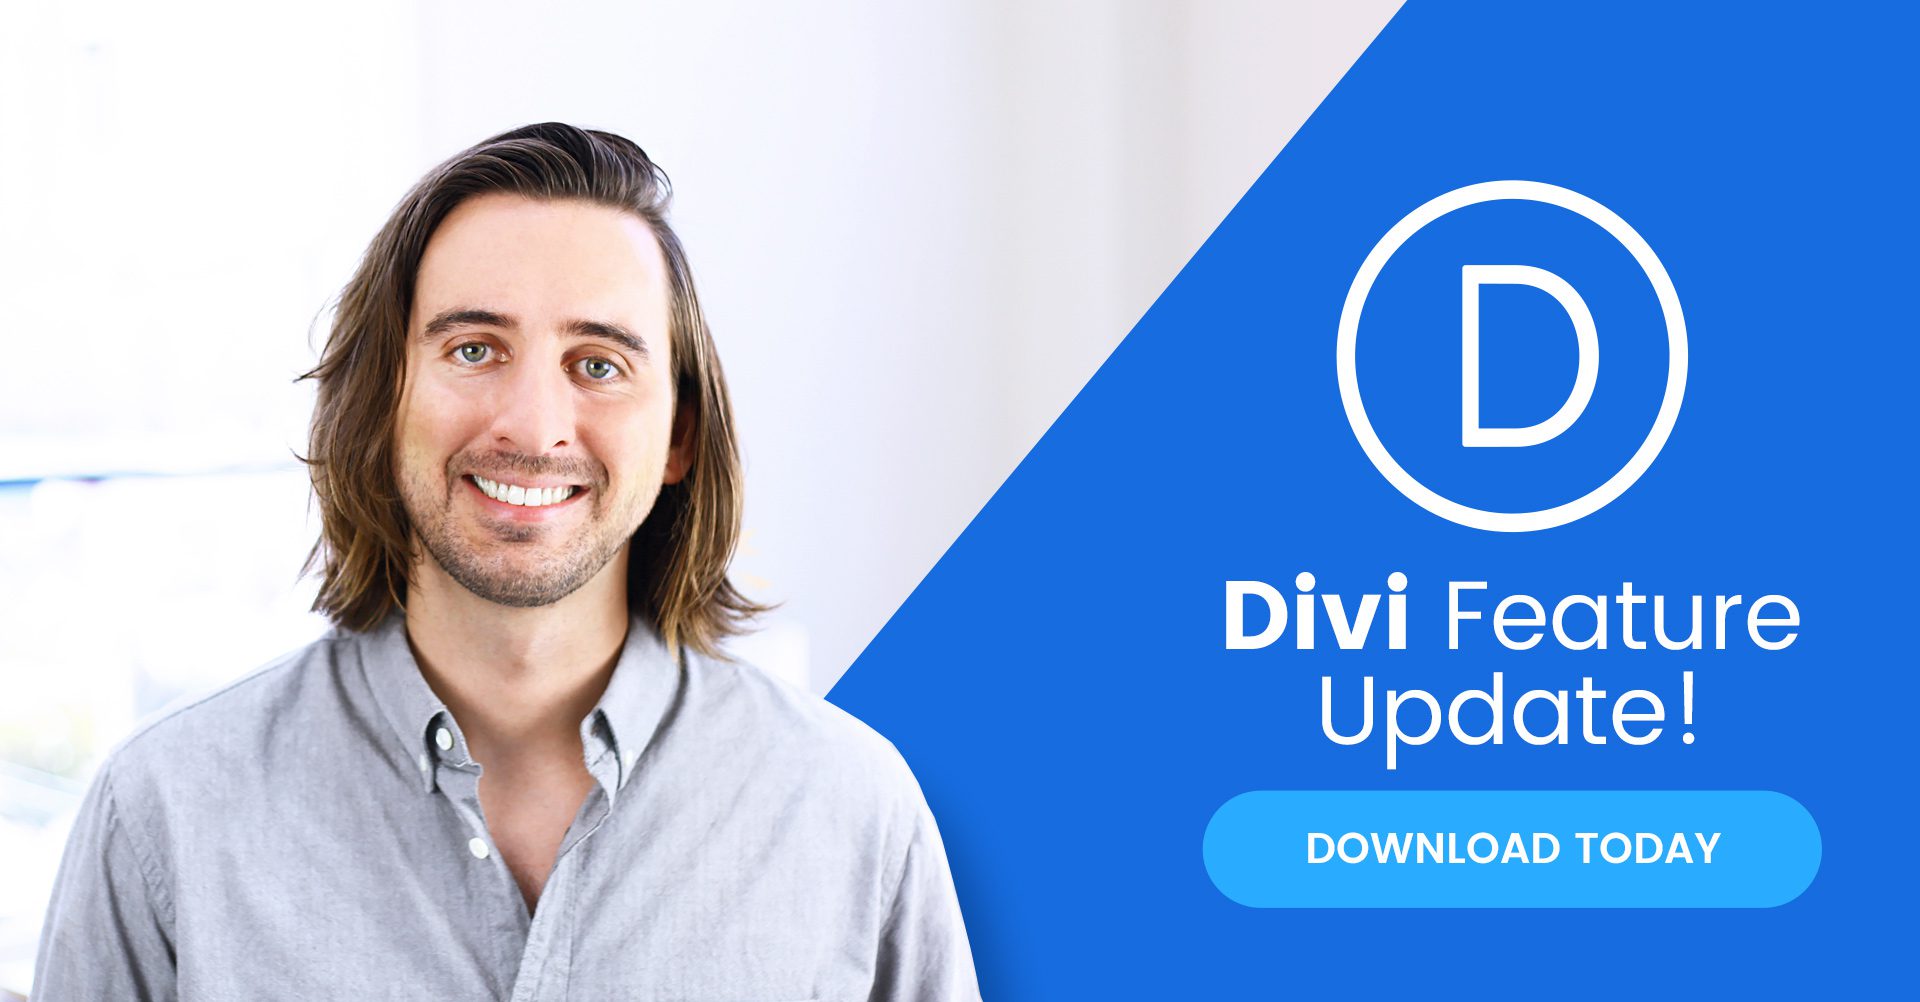 Divi Feature Update! The New Background Options Interface + Gradient Backgrounds And More